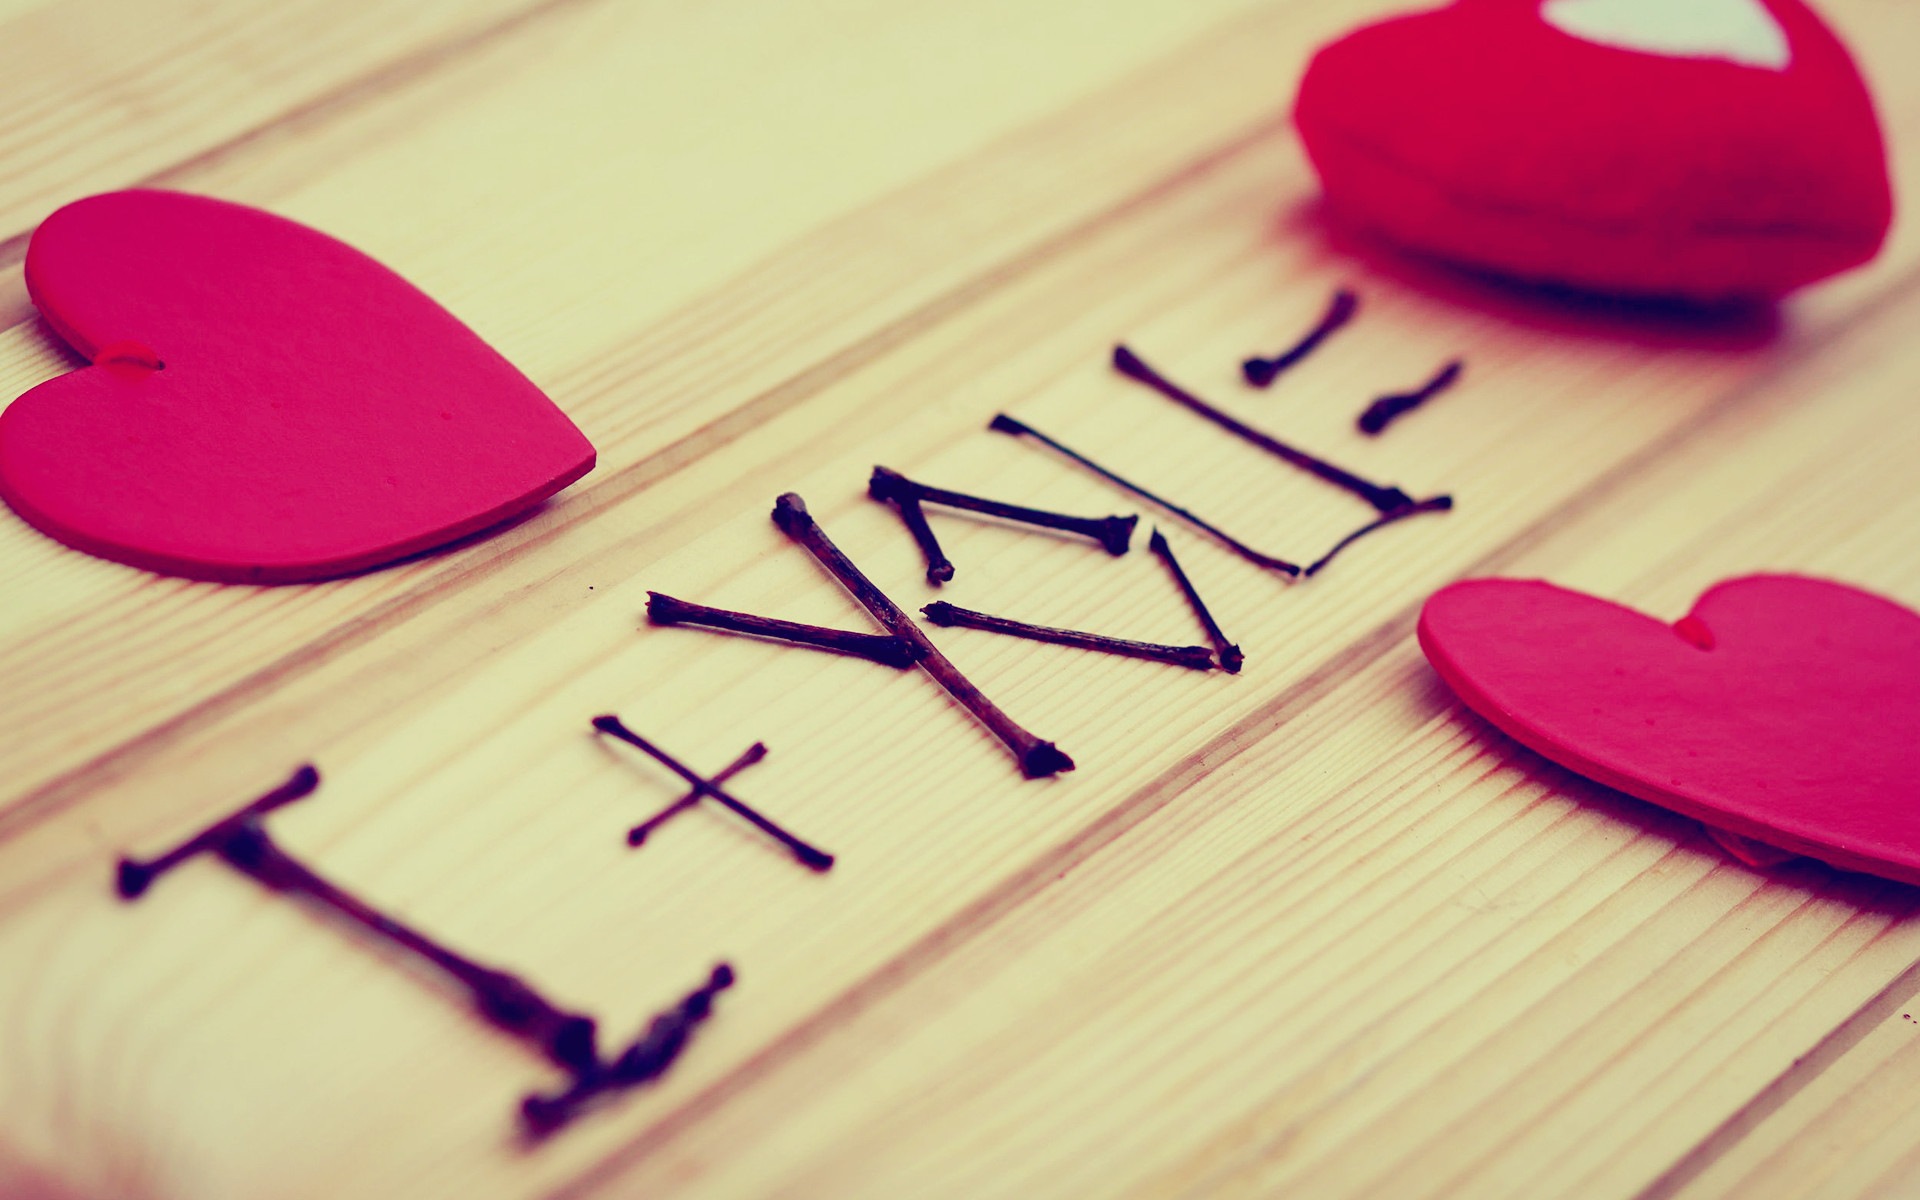 The theme of love, creative heart-shaped HD wallpapers #4 - 1920x1200